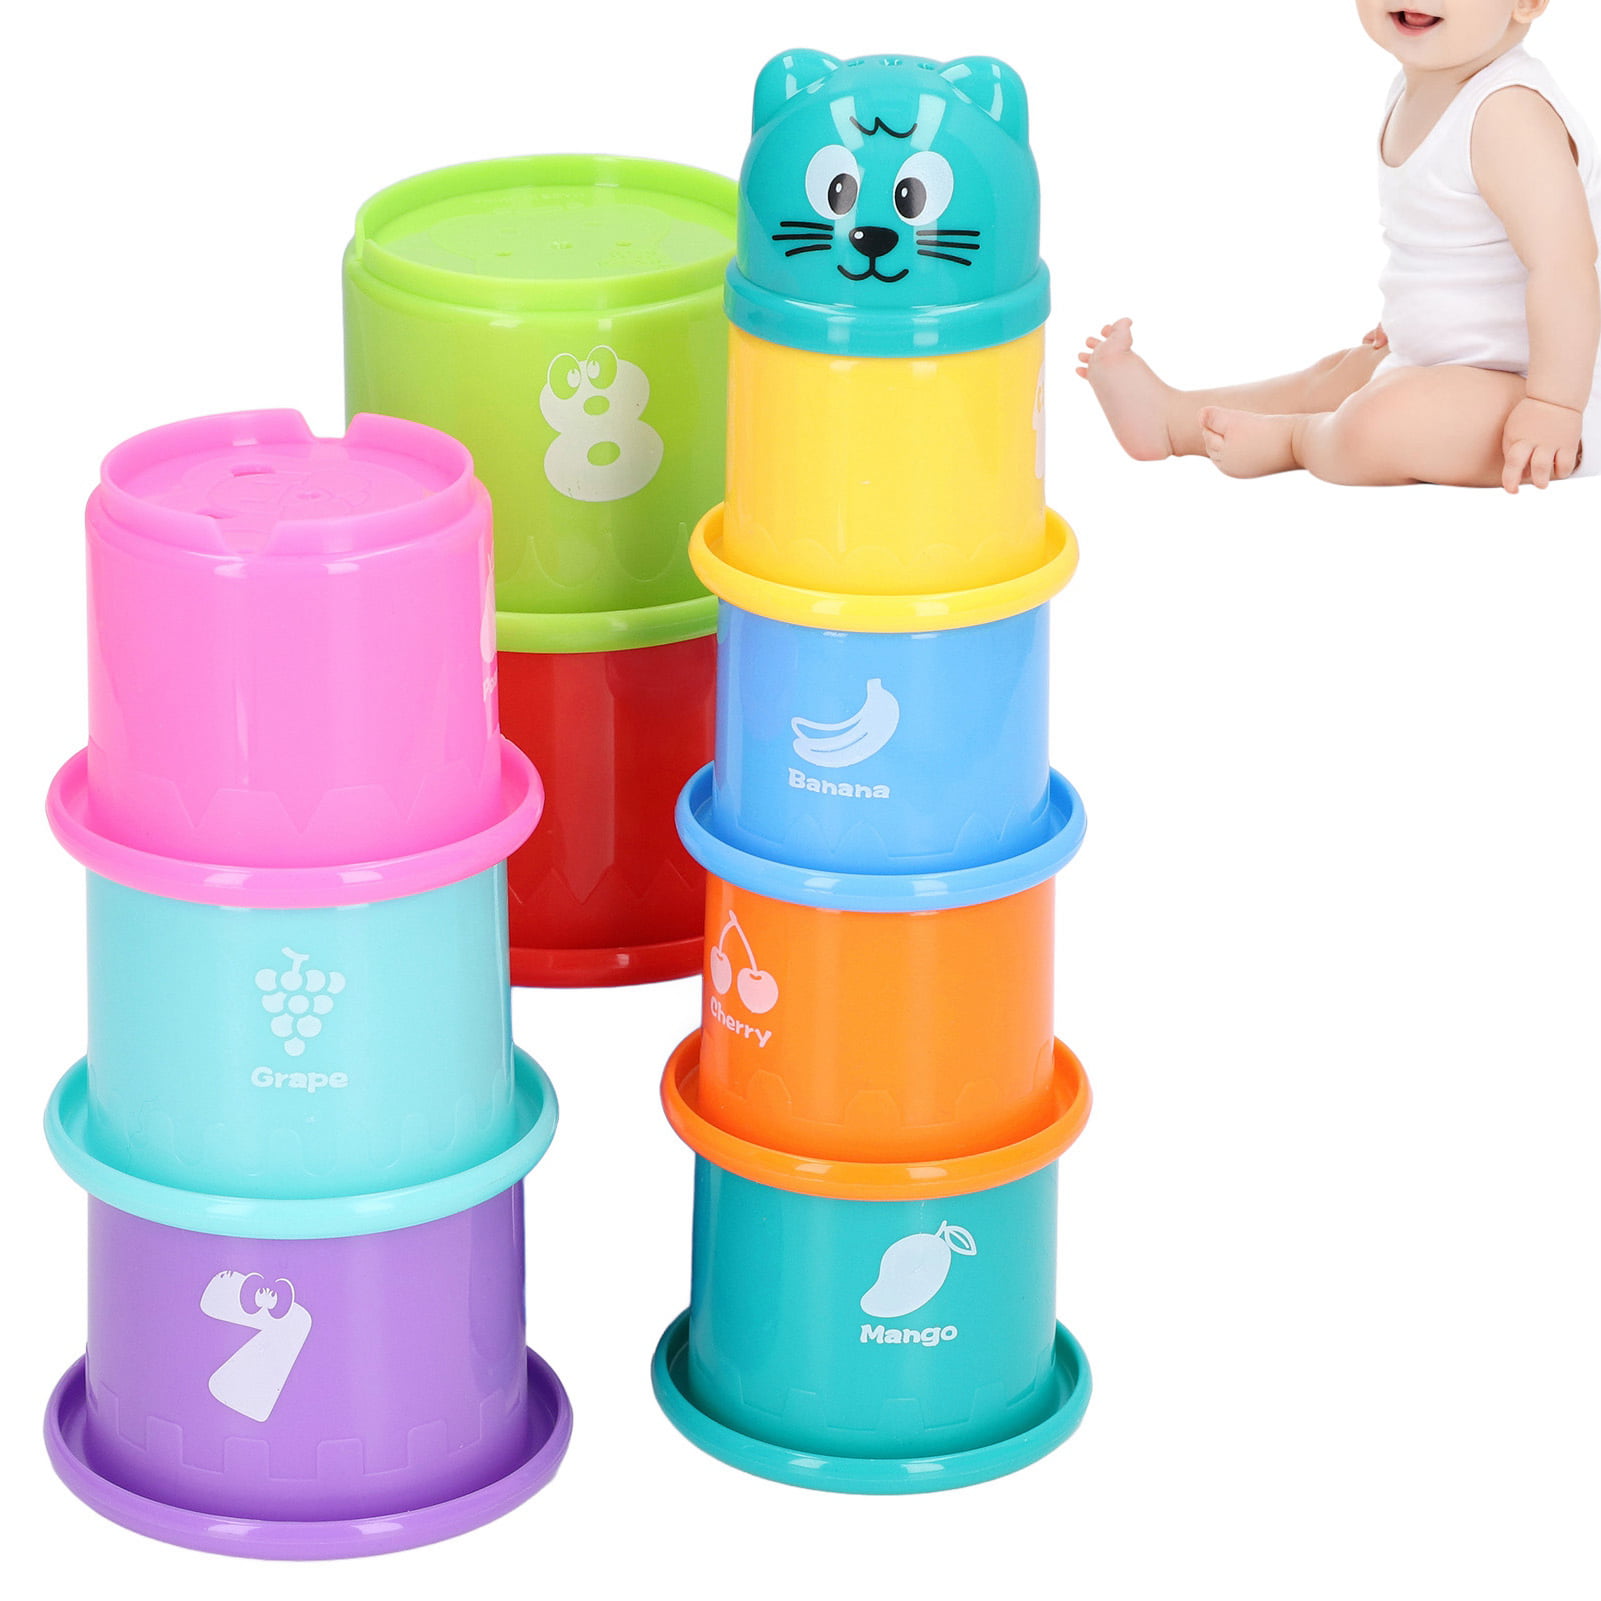 Baby Stacking Cups Toys Early Educational Toy for Toddlers 1-3 Years,Nesting Toys to 10 Months Infant,Suitable for Boys,Girls to Play at The Beach